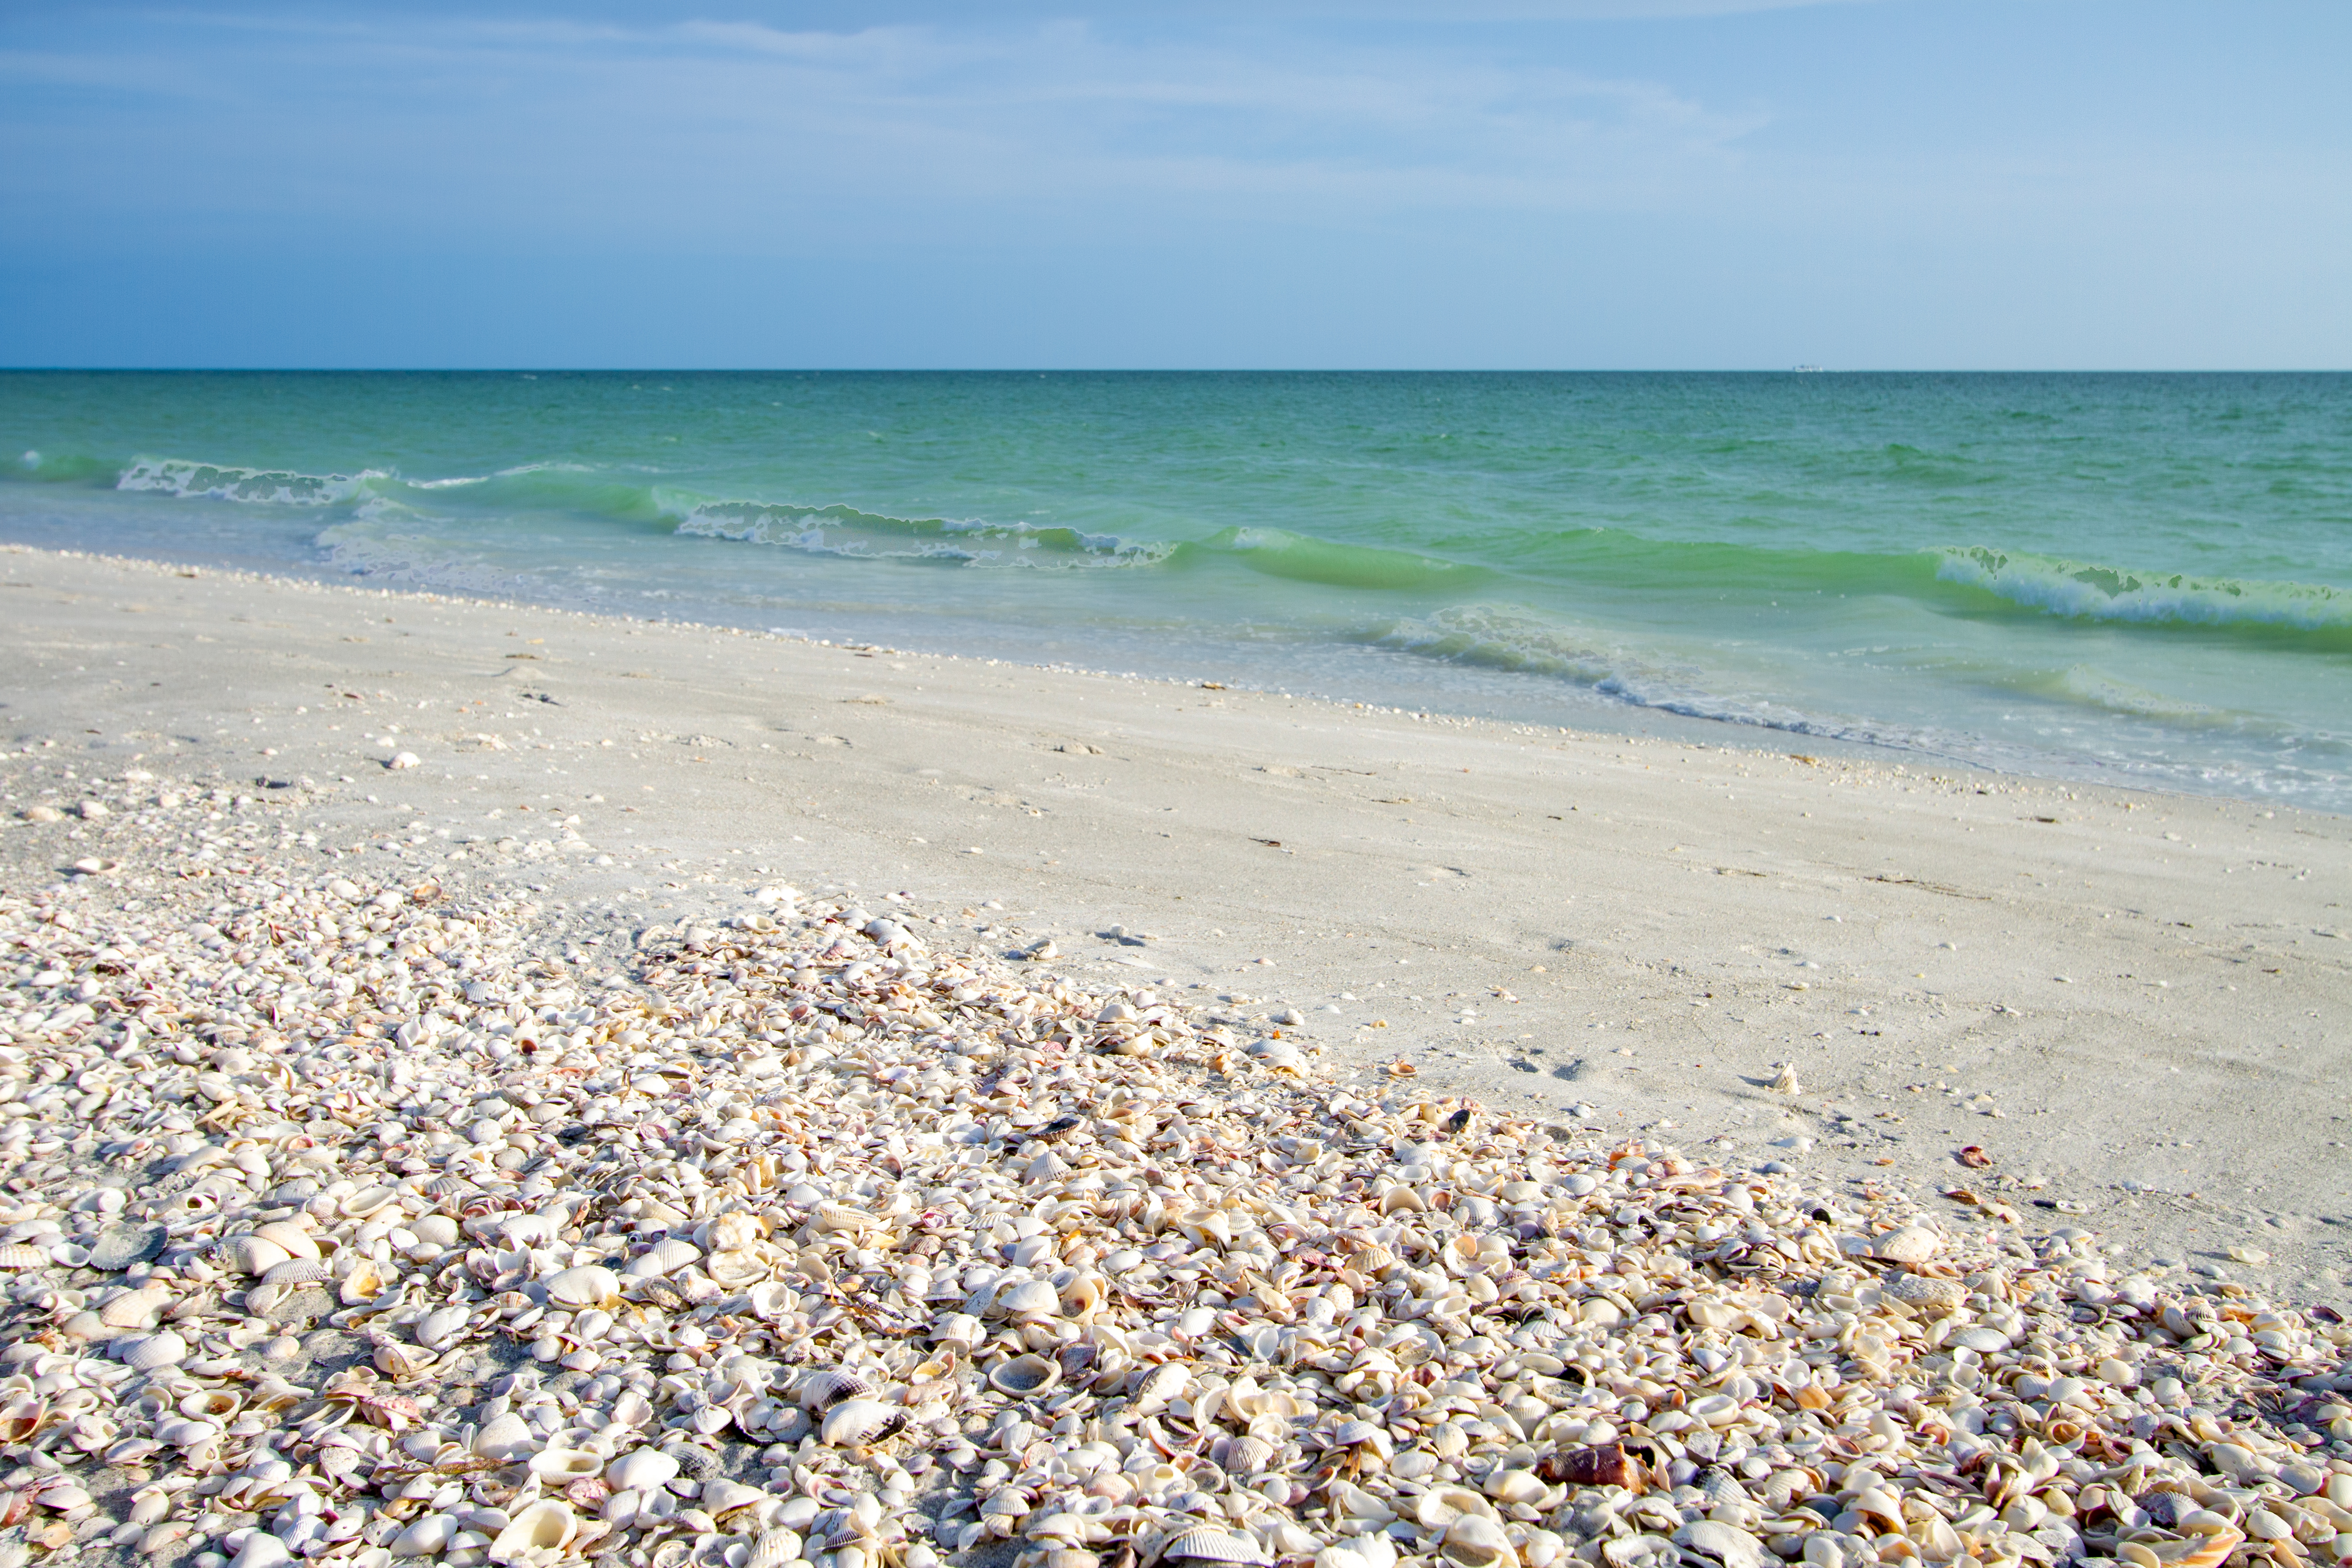 November & December Might Be the Best Time to Visit Sanibel Island